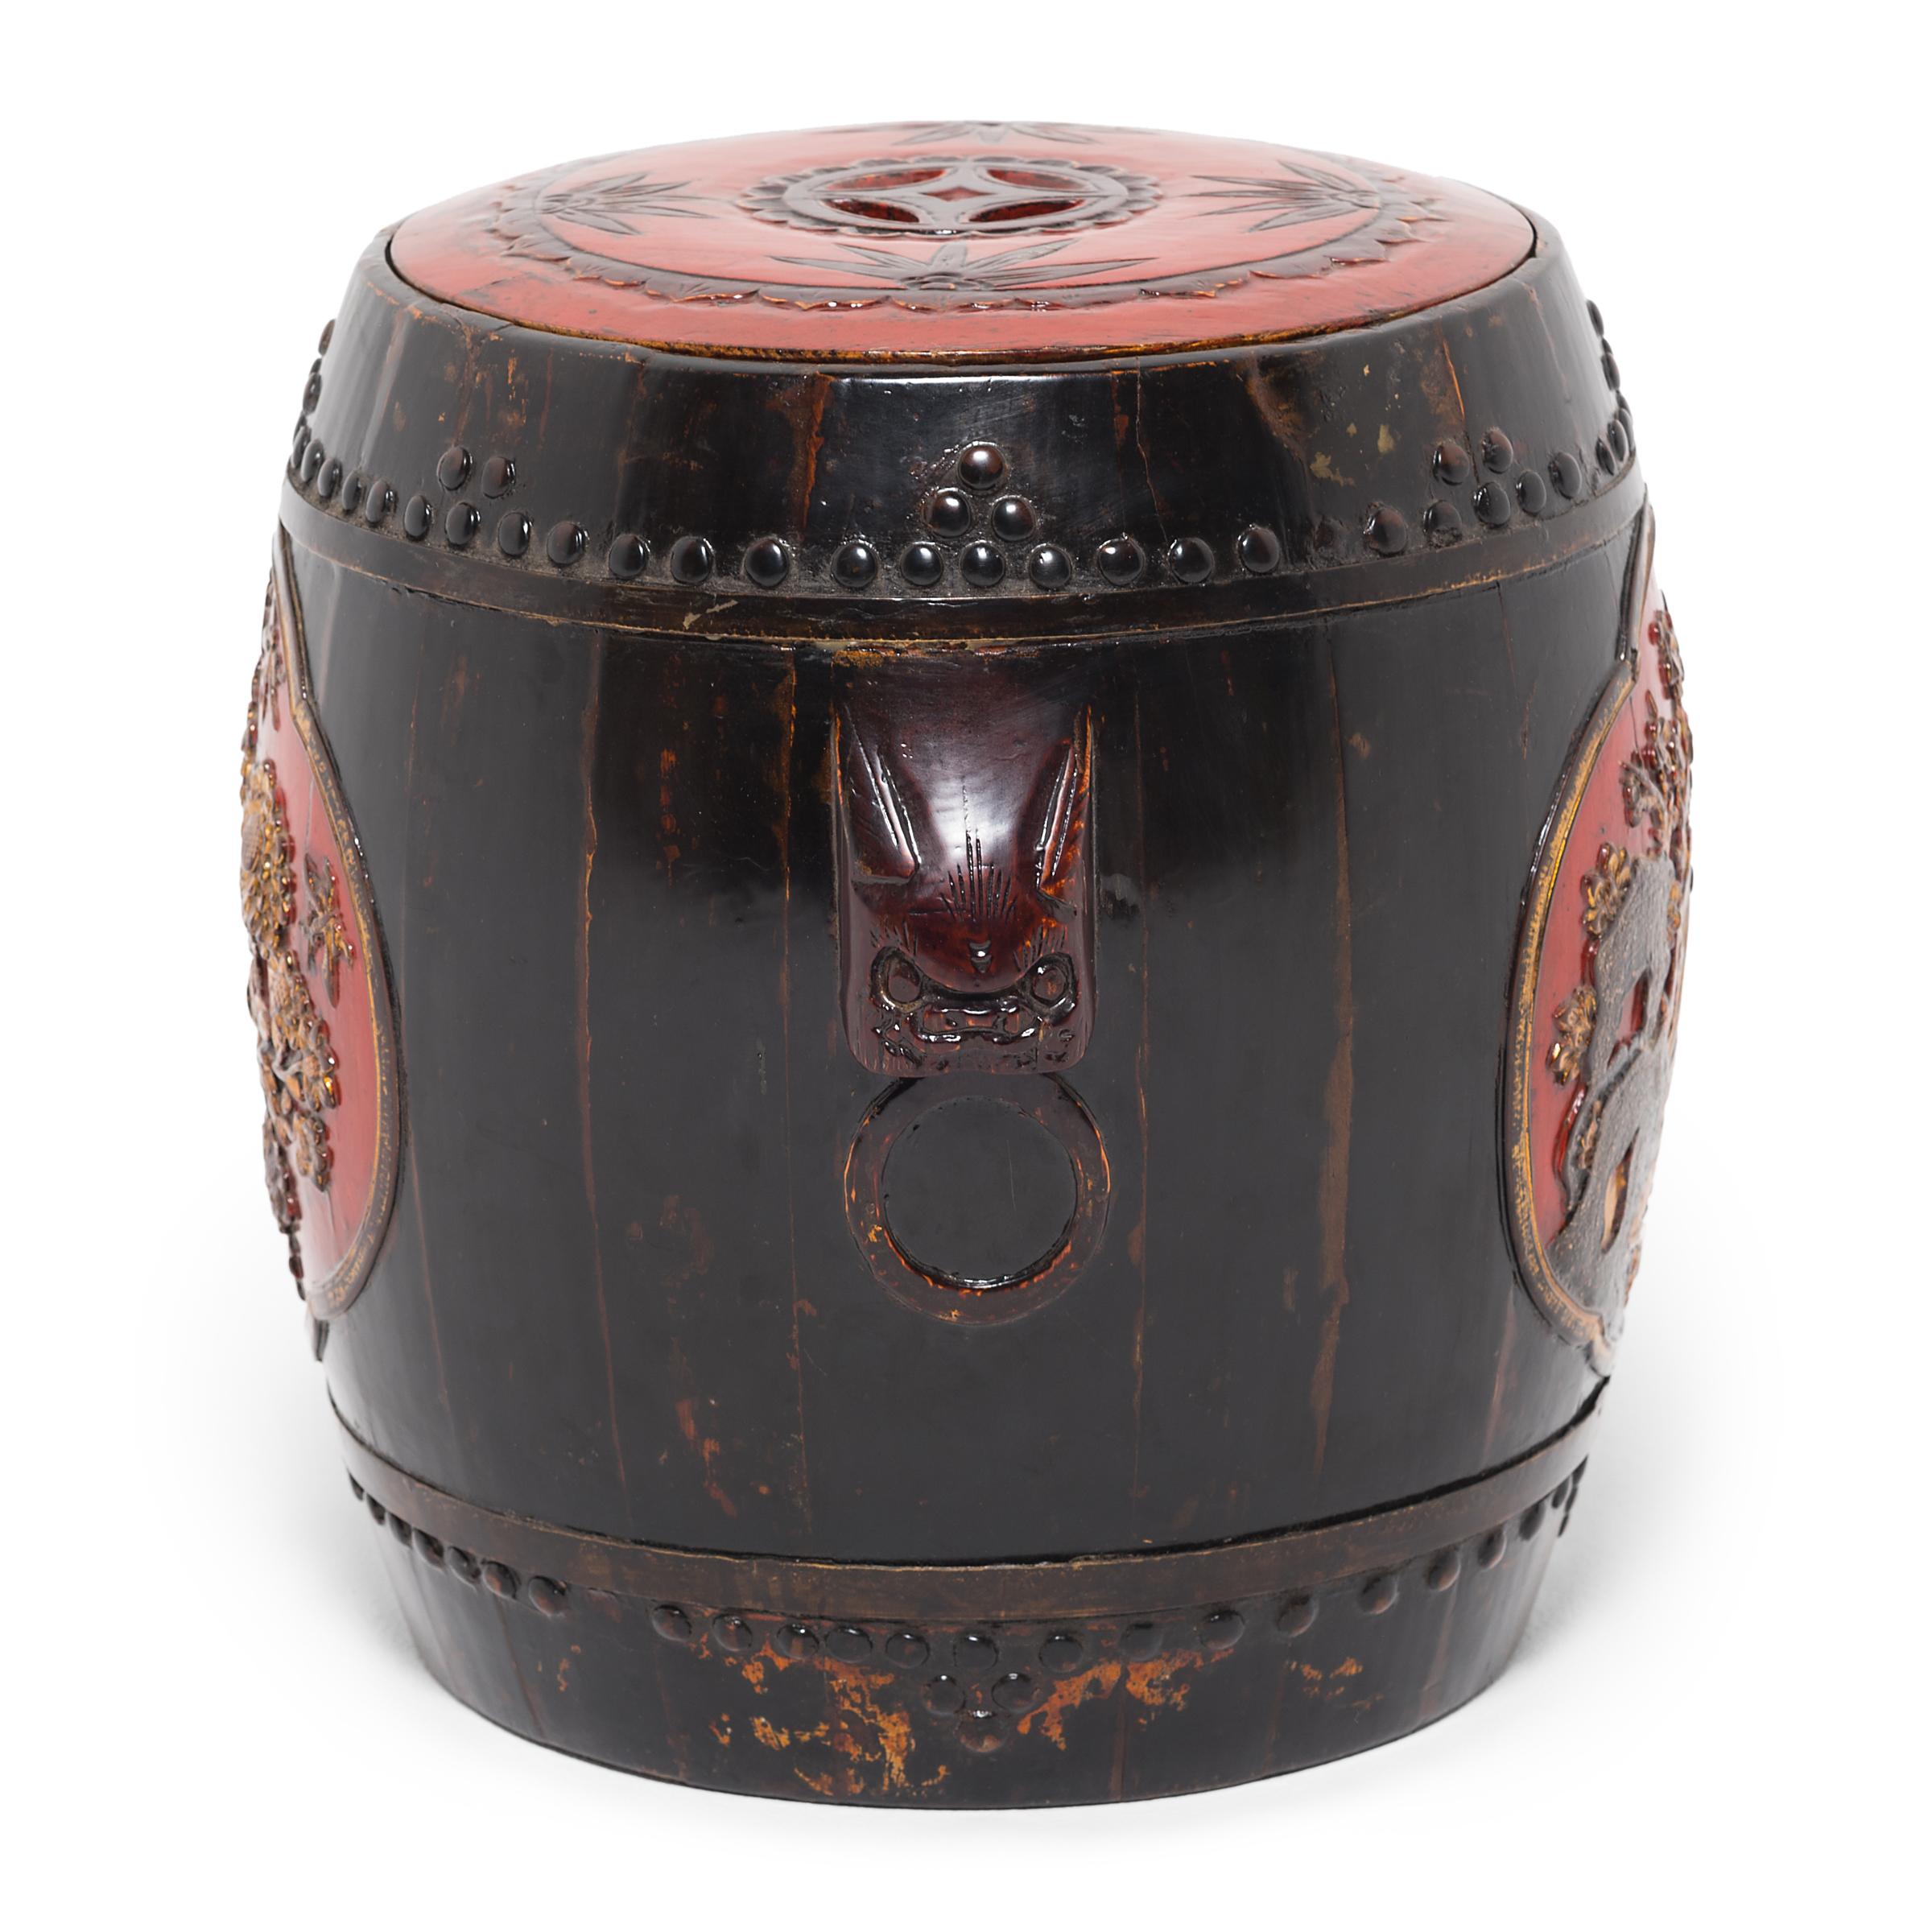 This 19th century drum-form stool is assembled with traditional stave and hoop construction, with two bands of decorative nailheads. Painted in red and gold, two colors thought to bring good luck, the stool is adorned with low-relief carvings of